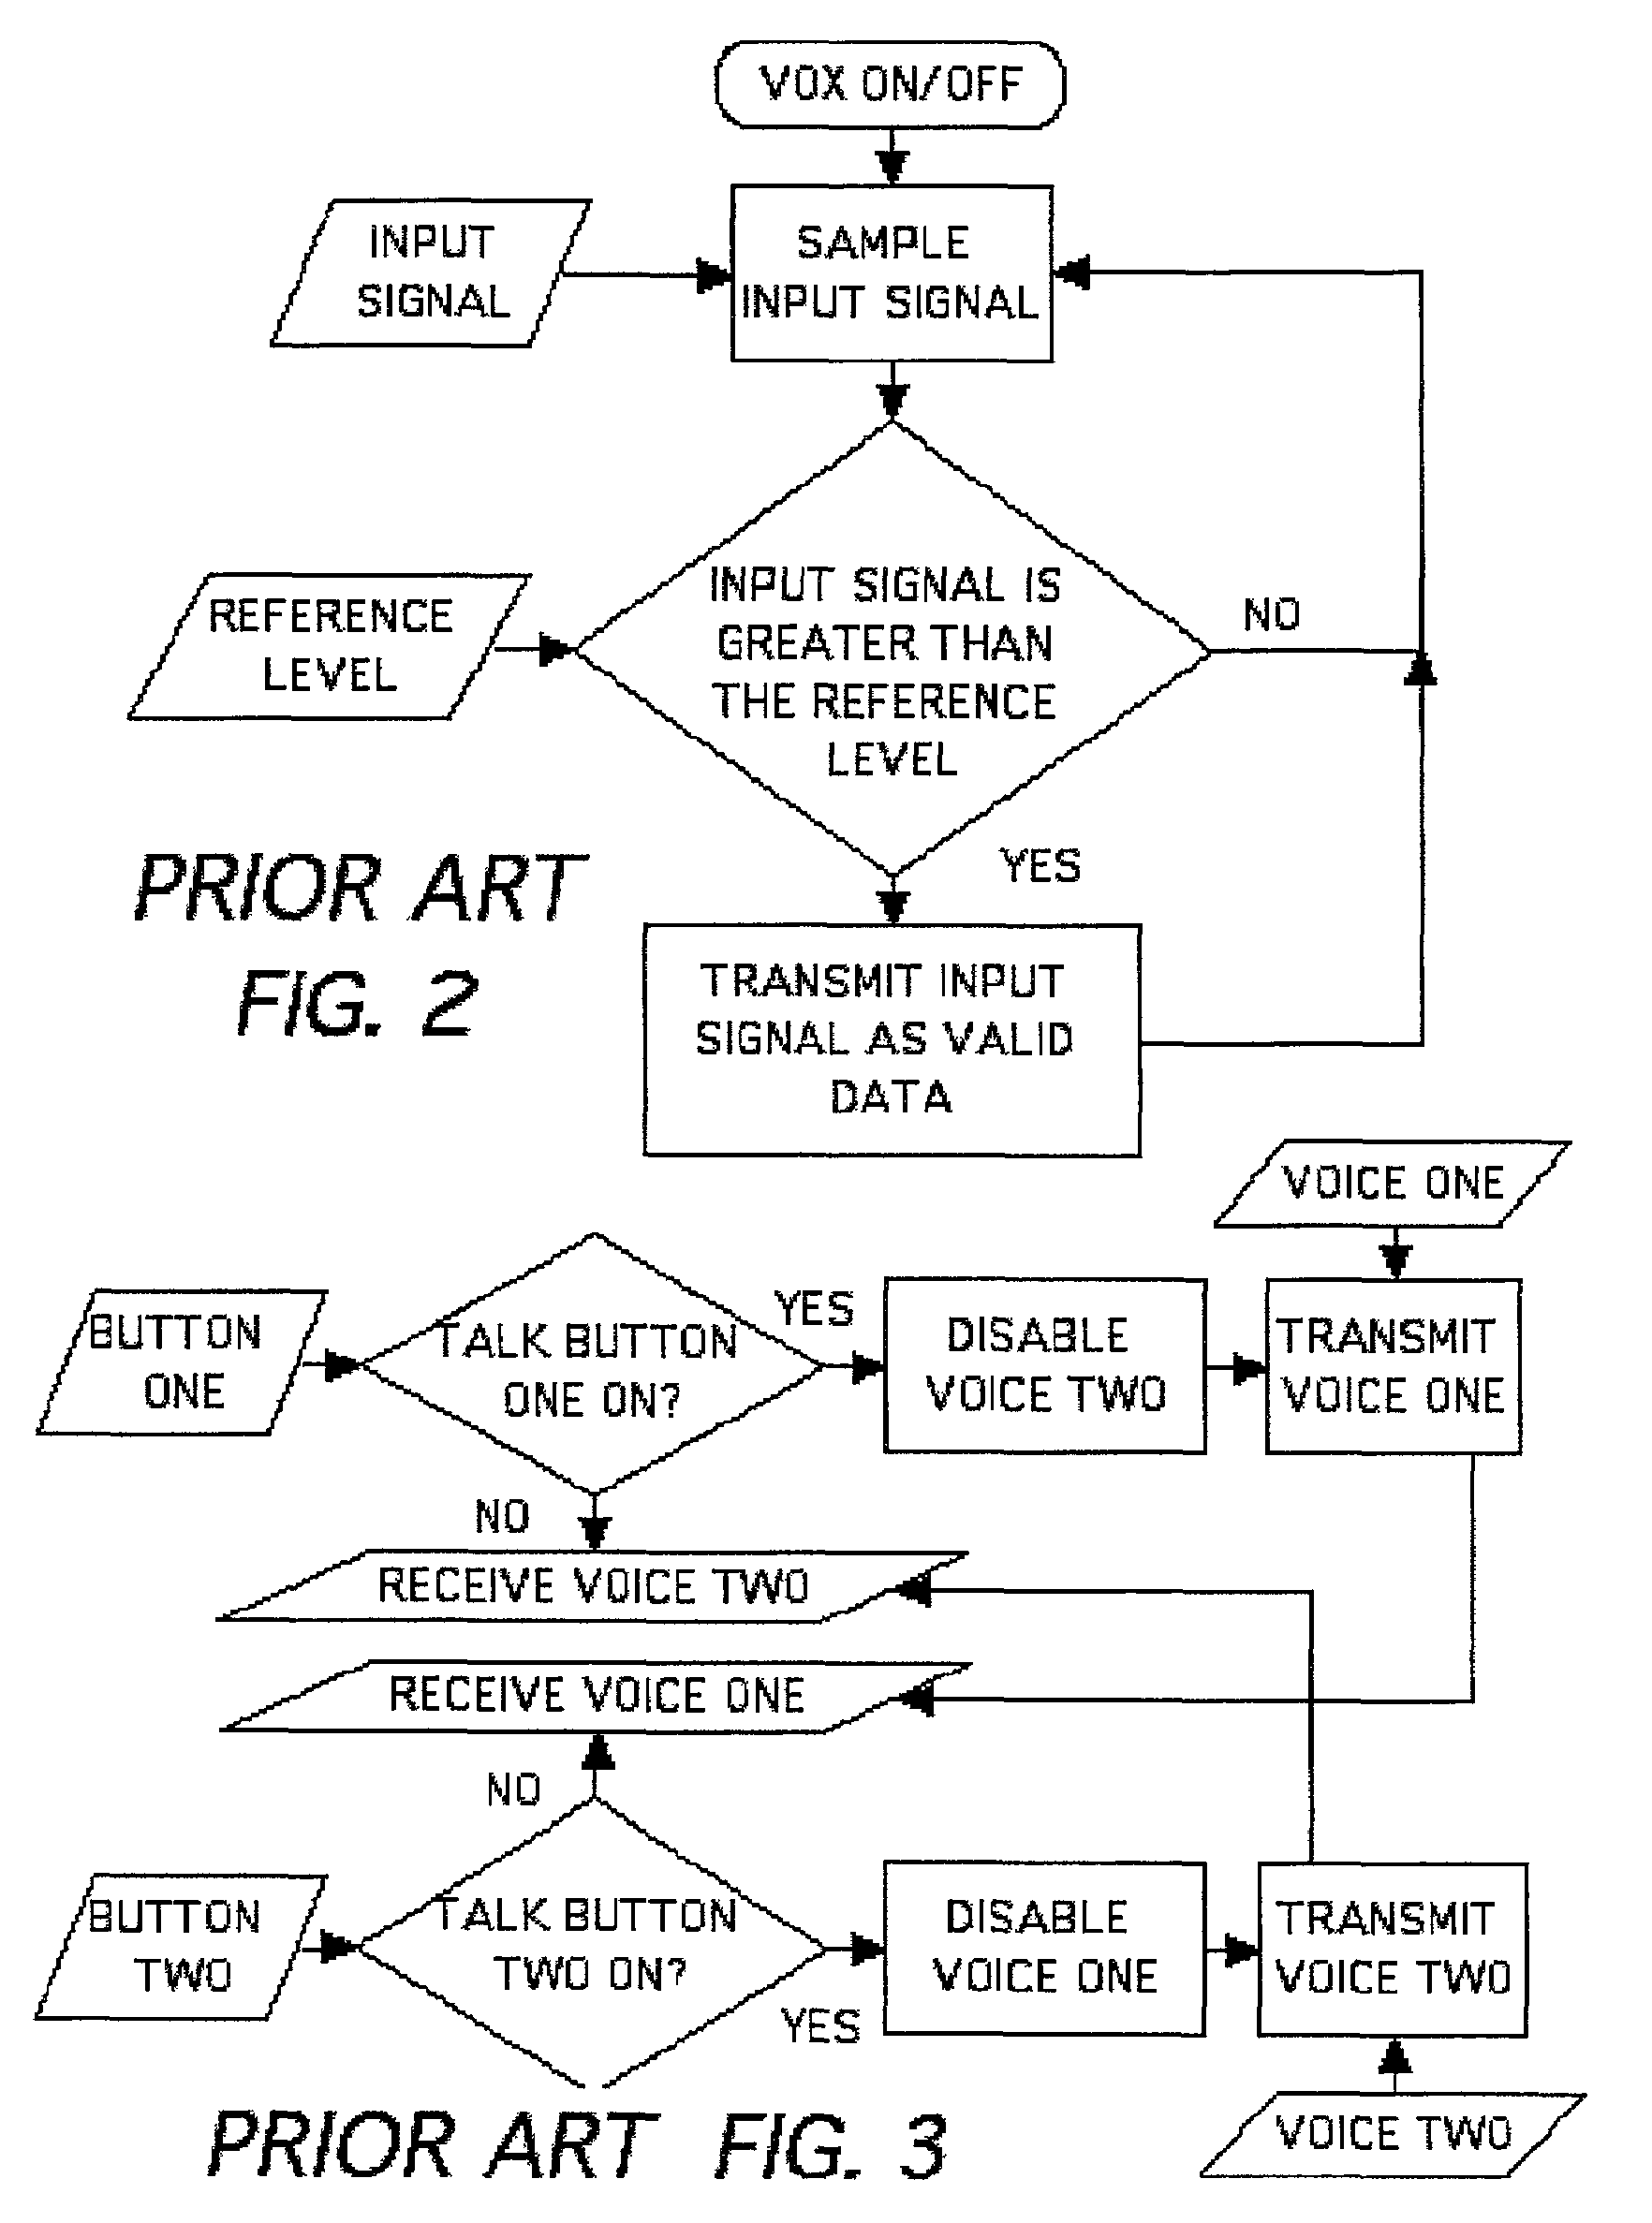 Dynamic adjustment of noise separation in data handling, particularly voice activation